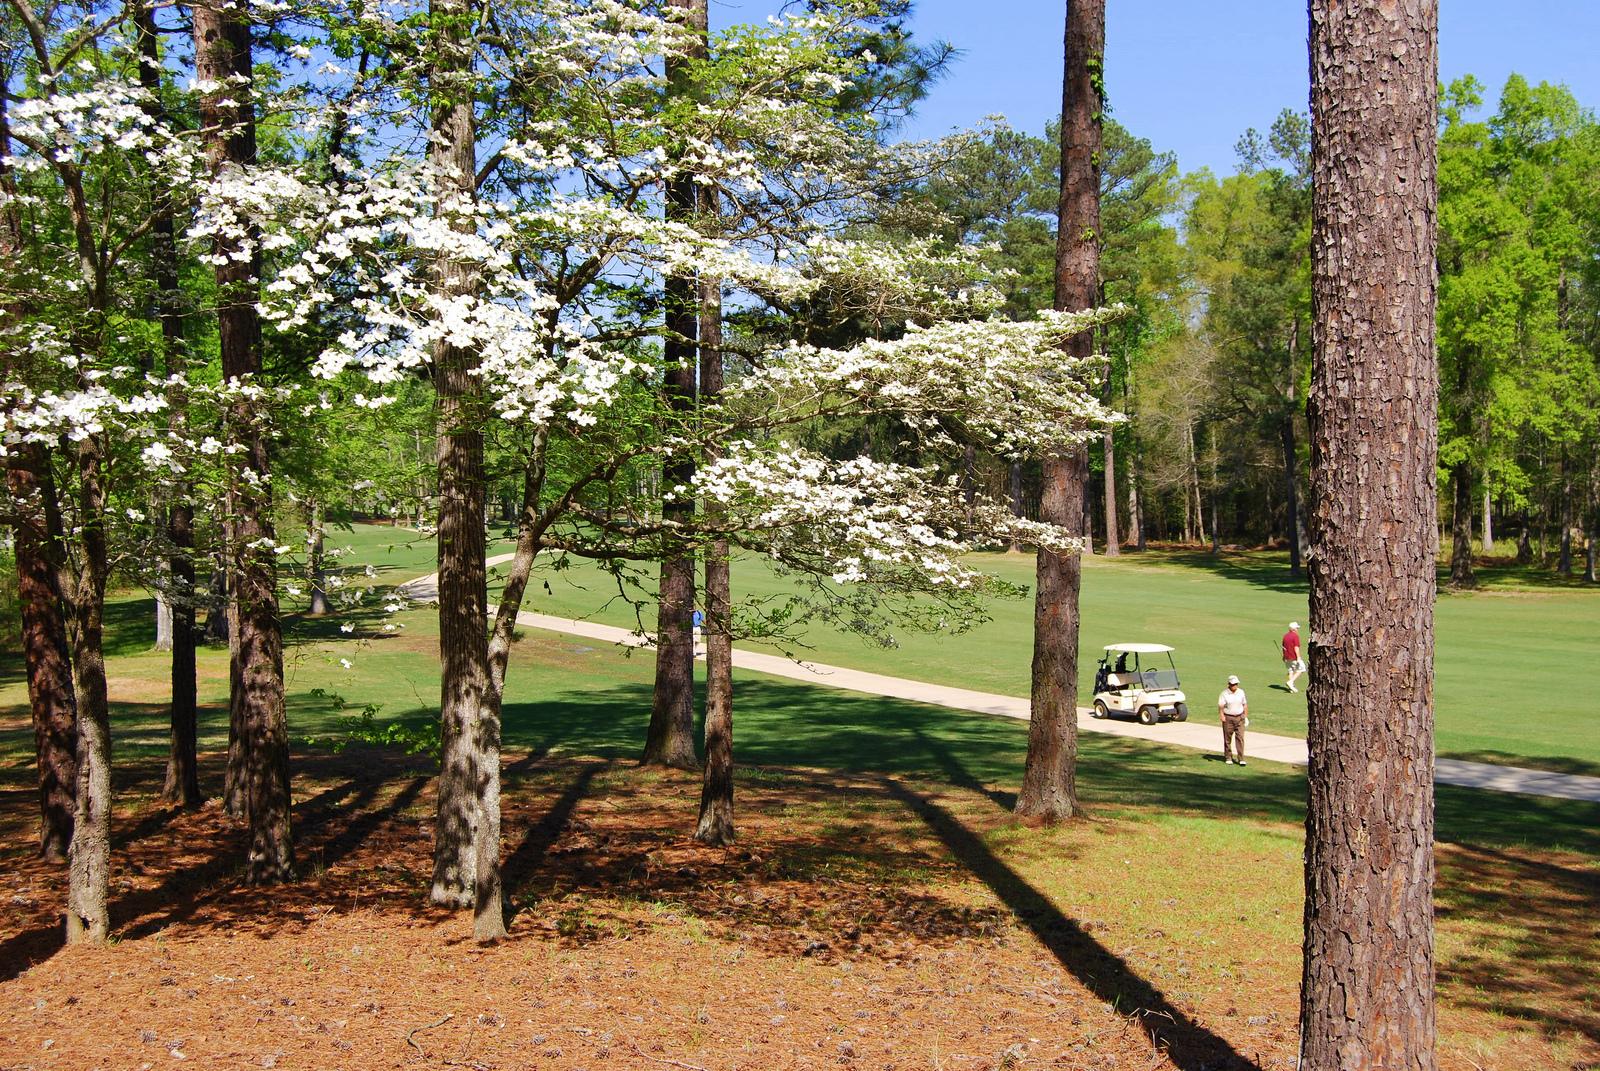 Golf Course at Oak Mountain State Park